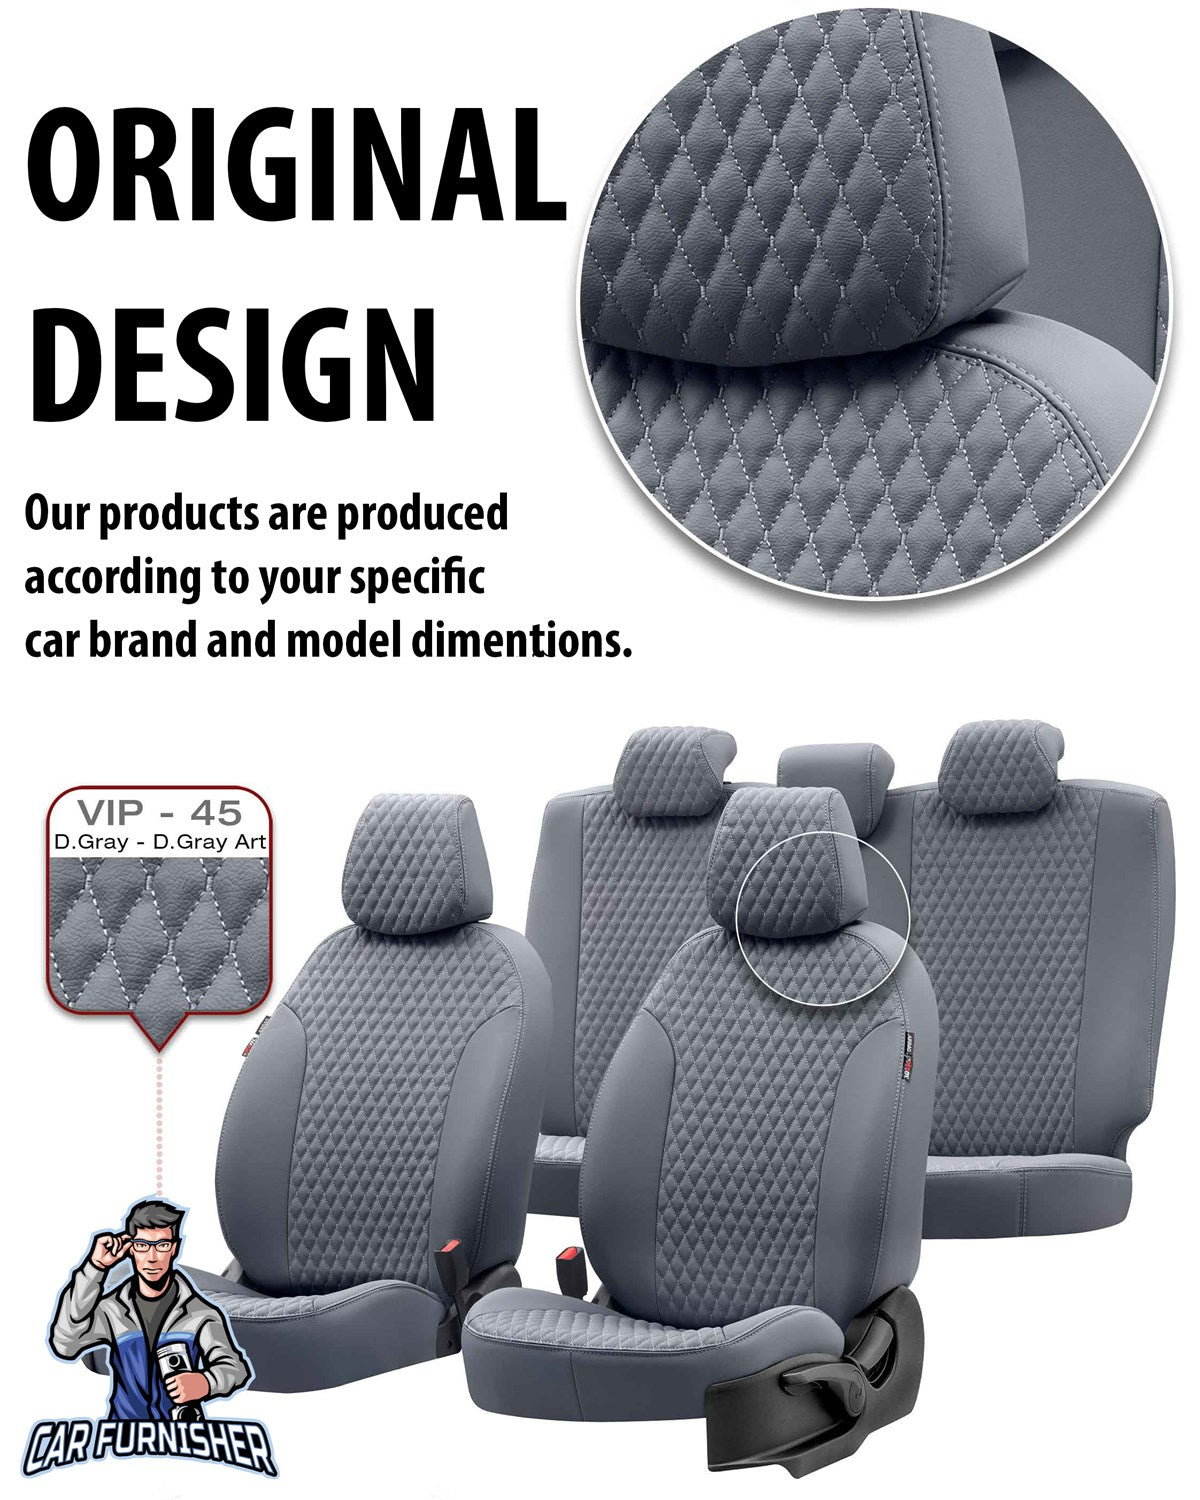 Kia XCeed Seat Covers Amsterdam Leather Design Smoked Black Leather